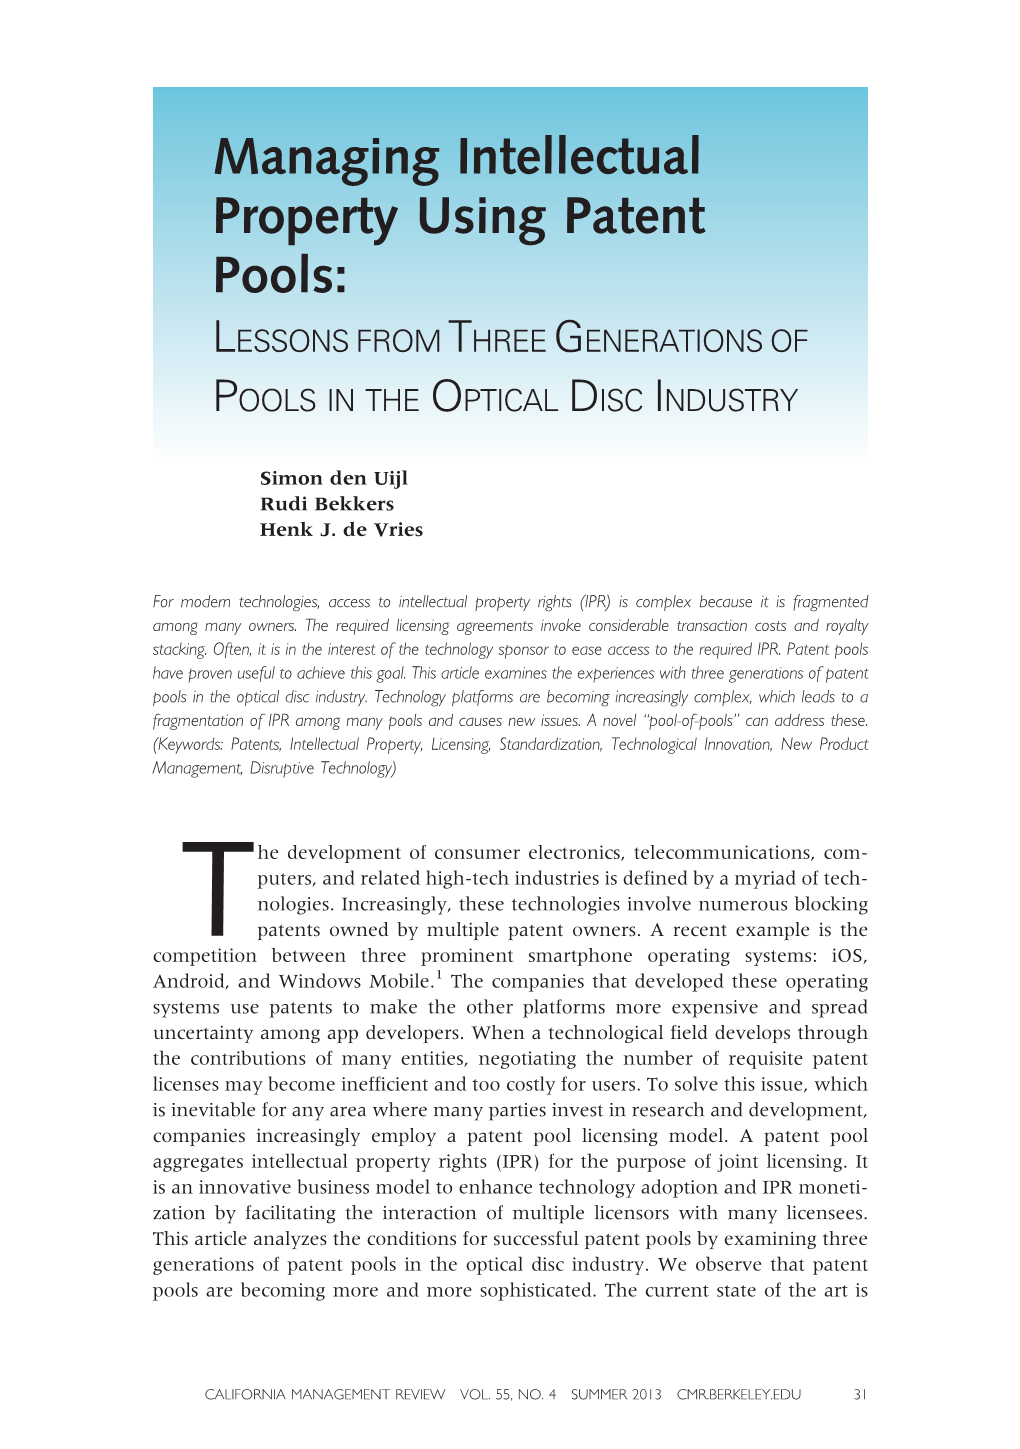 Managing Intellectual Property Using Patent Pools: LESSONS from THREE GENERATIONS of POOLS in the OPTICAL DISC INDUSTRY